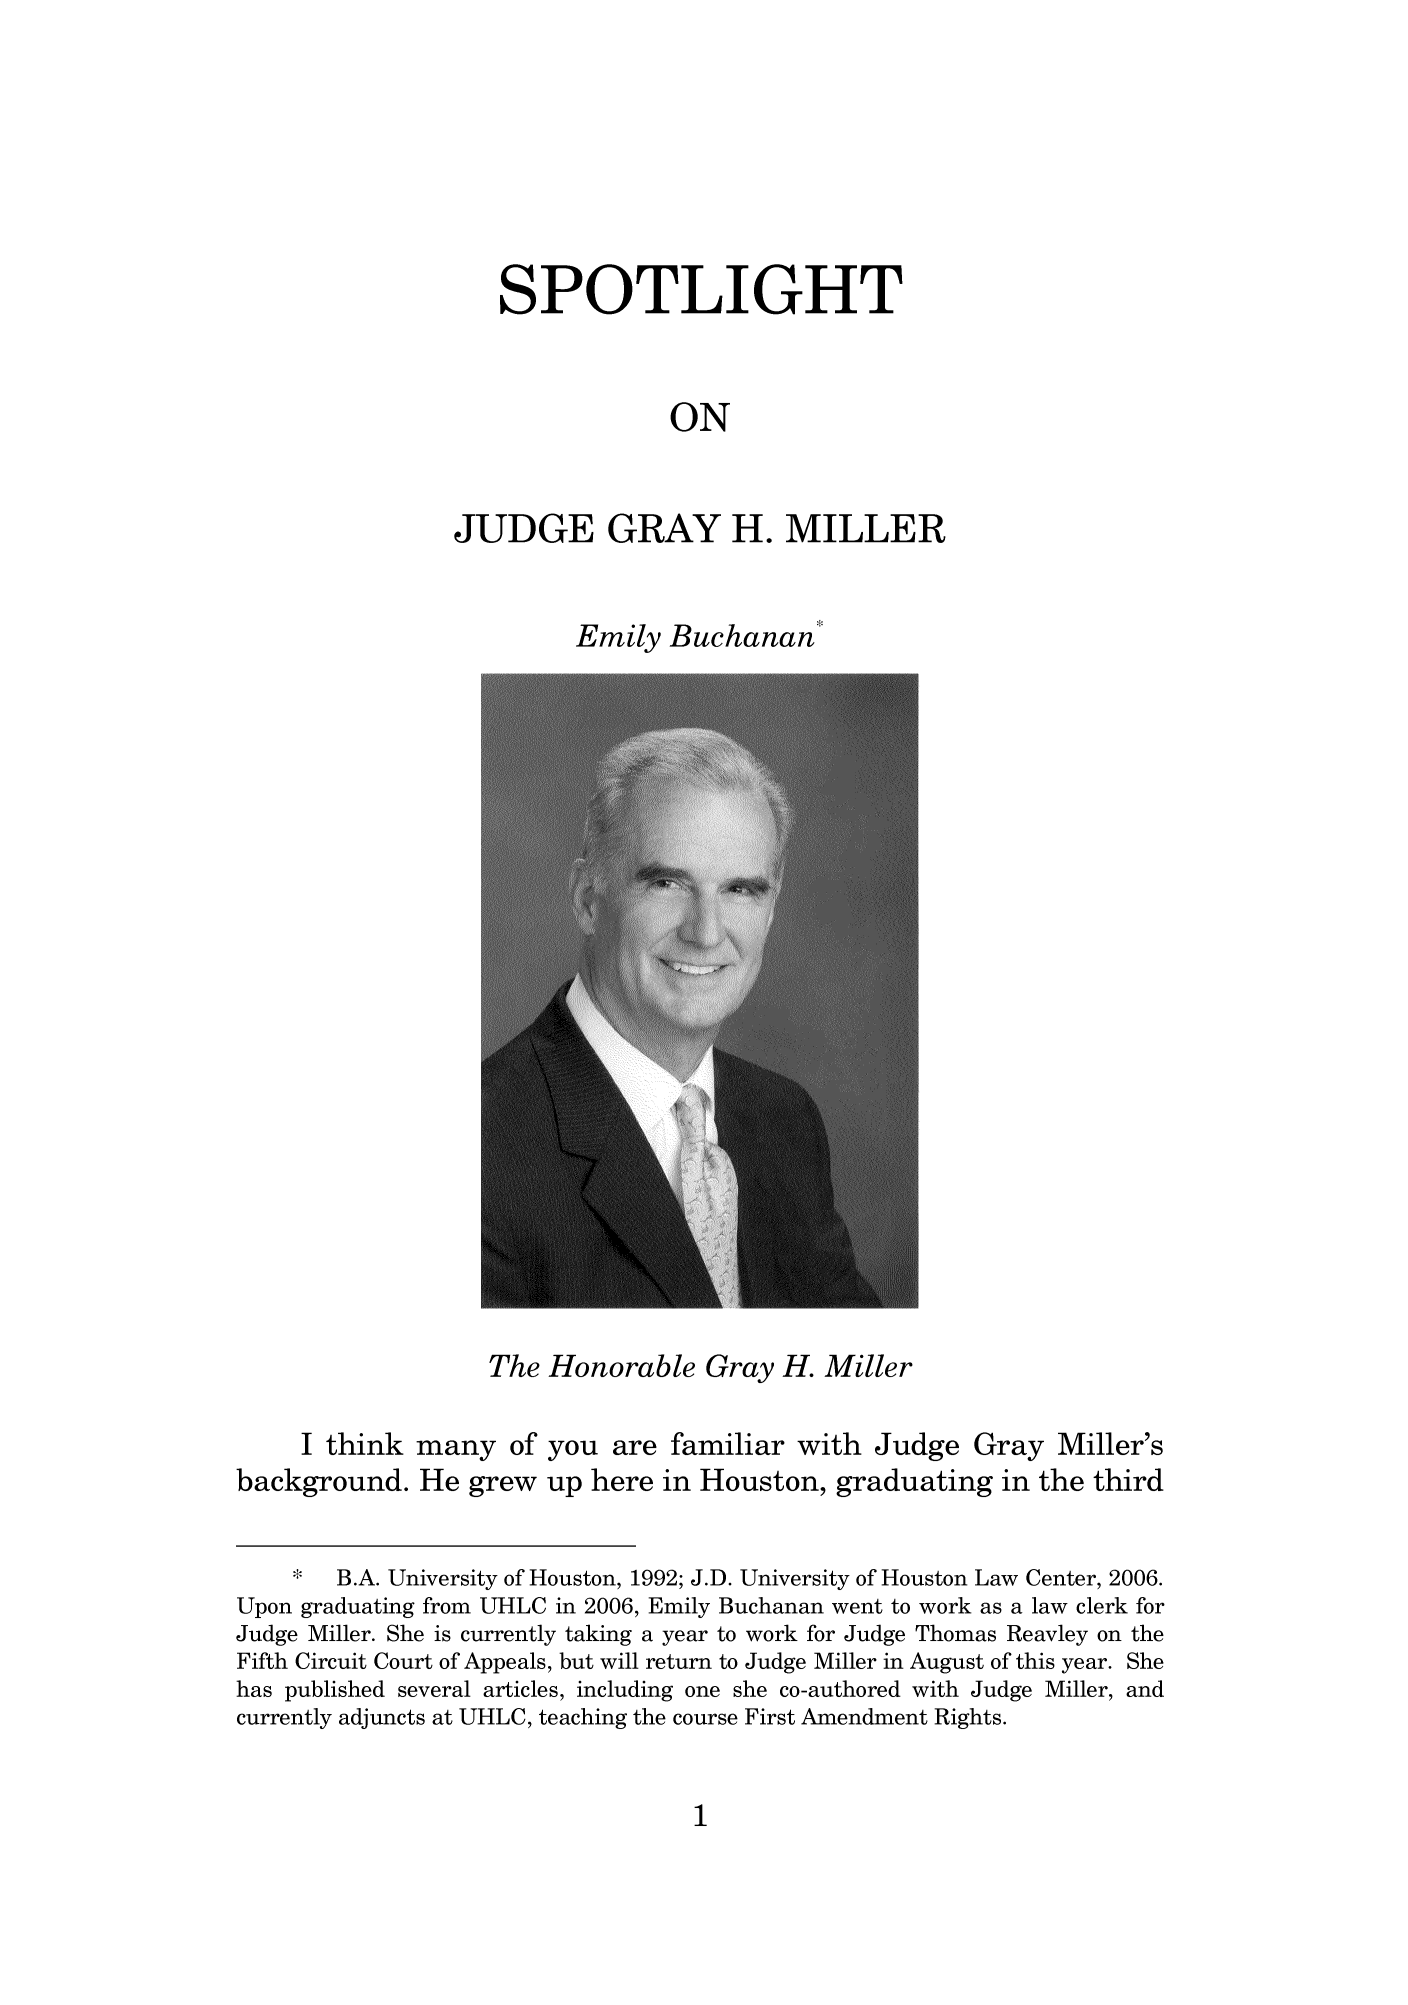 handle is hein.journals/hlreoffrec1 and id is 1 raw text is: SPOTLIGHTONJUDGE GRAY H. MILLEREmily Buchanan'The Honorable Gray H. MillerI think many of you are familiar with Judge Gray Miller'sbackground. He grew up here in Houston, graduating in the third*   B.A. University of Houston, 1992; J.D. University of Houston Law Center, 2006.Upon graduating from UHLC in 2006, Emily Buchanan went to work as a law clerk forJudge Miller. She is currently taking a year to work for Judge Thomas Reavley on theFifth Circuit Court of Appeals, but will return to Judge Miller in August of this year. Shehas published several articles, including one she co-authored with Judge Miller, andcurrently adjuncts at UHLC, teaching the course First Amendment Rights.